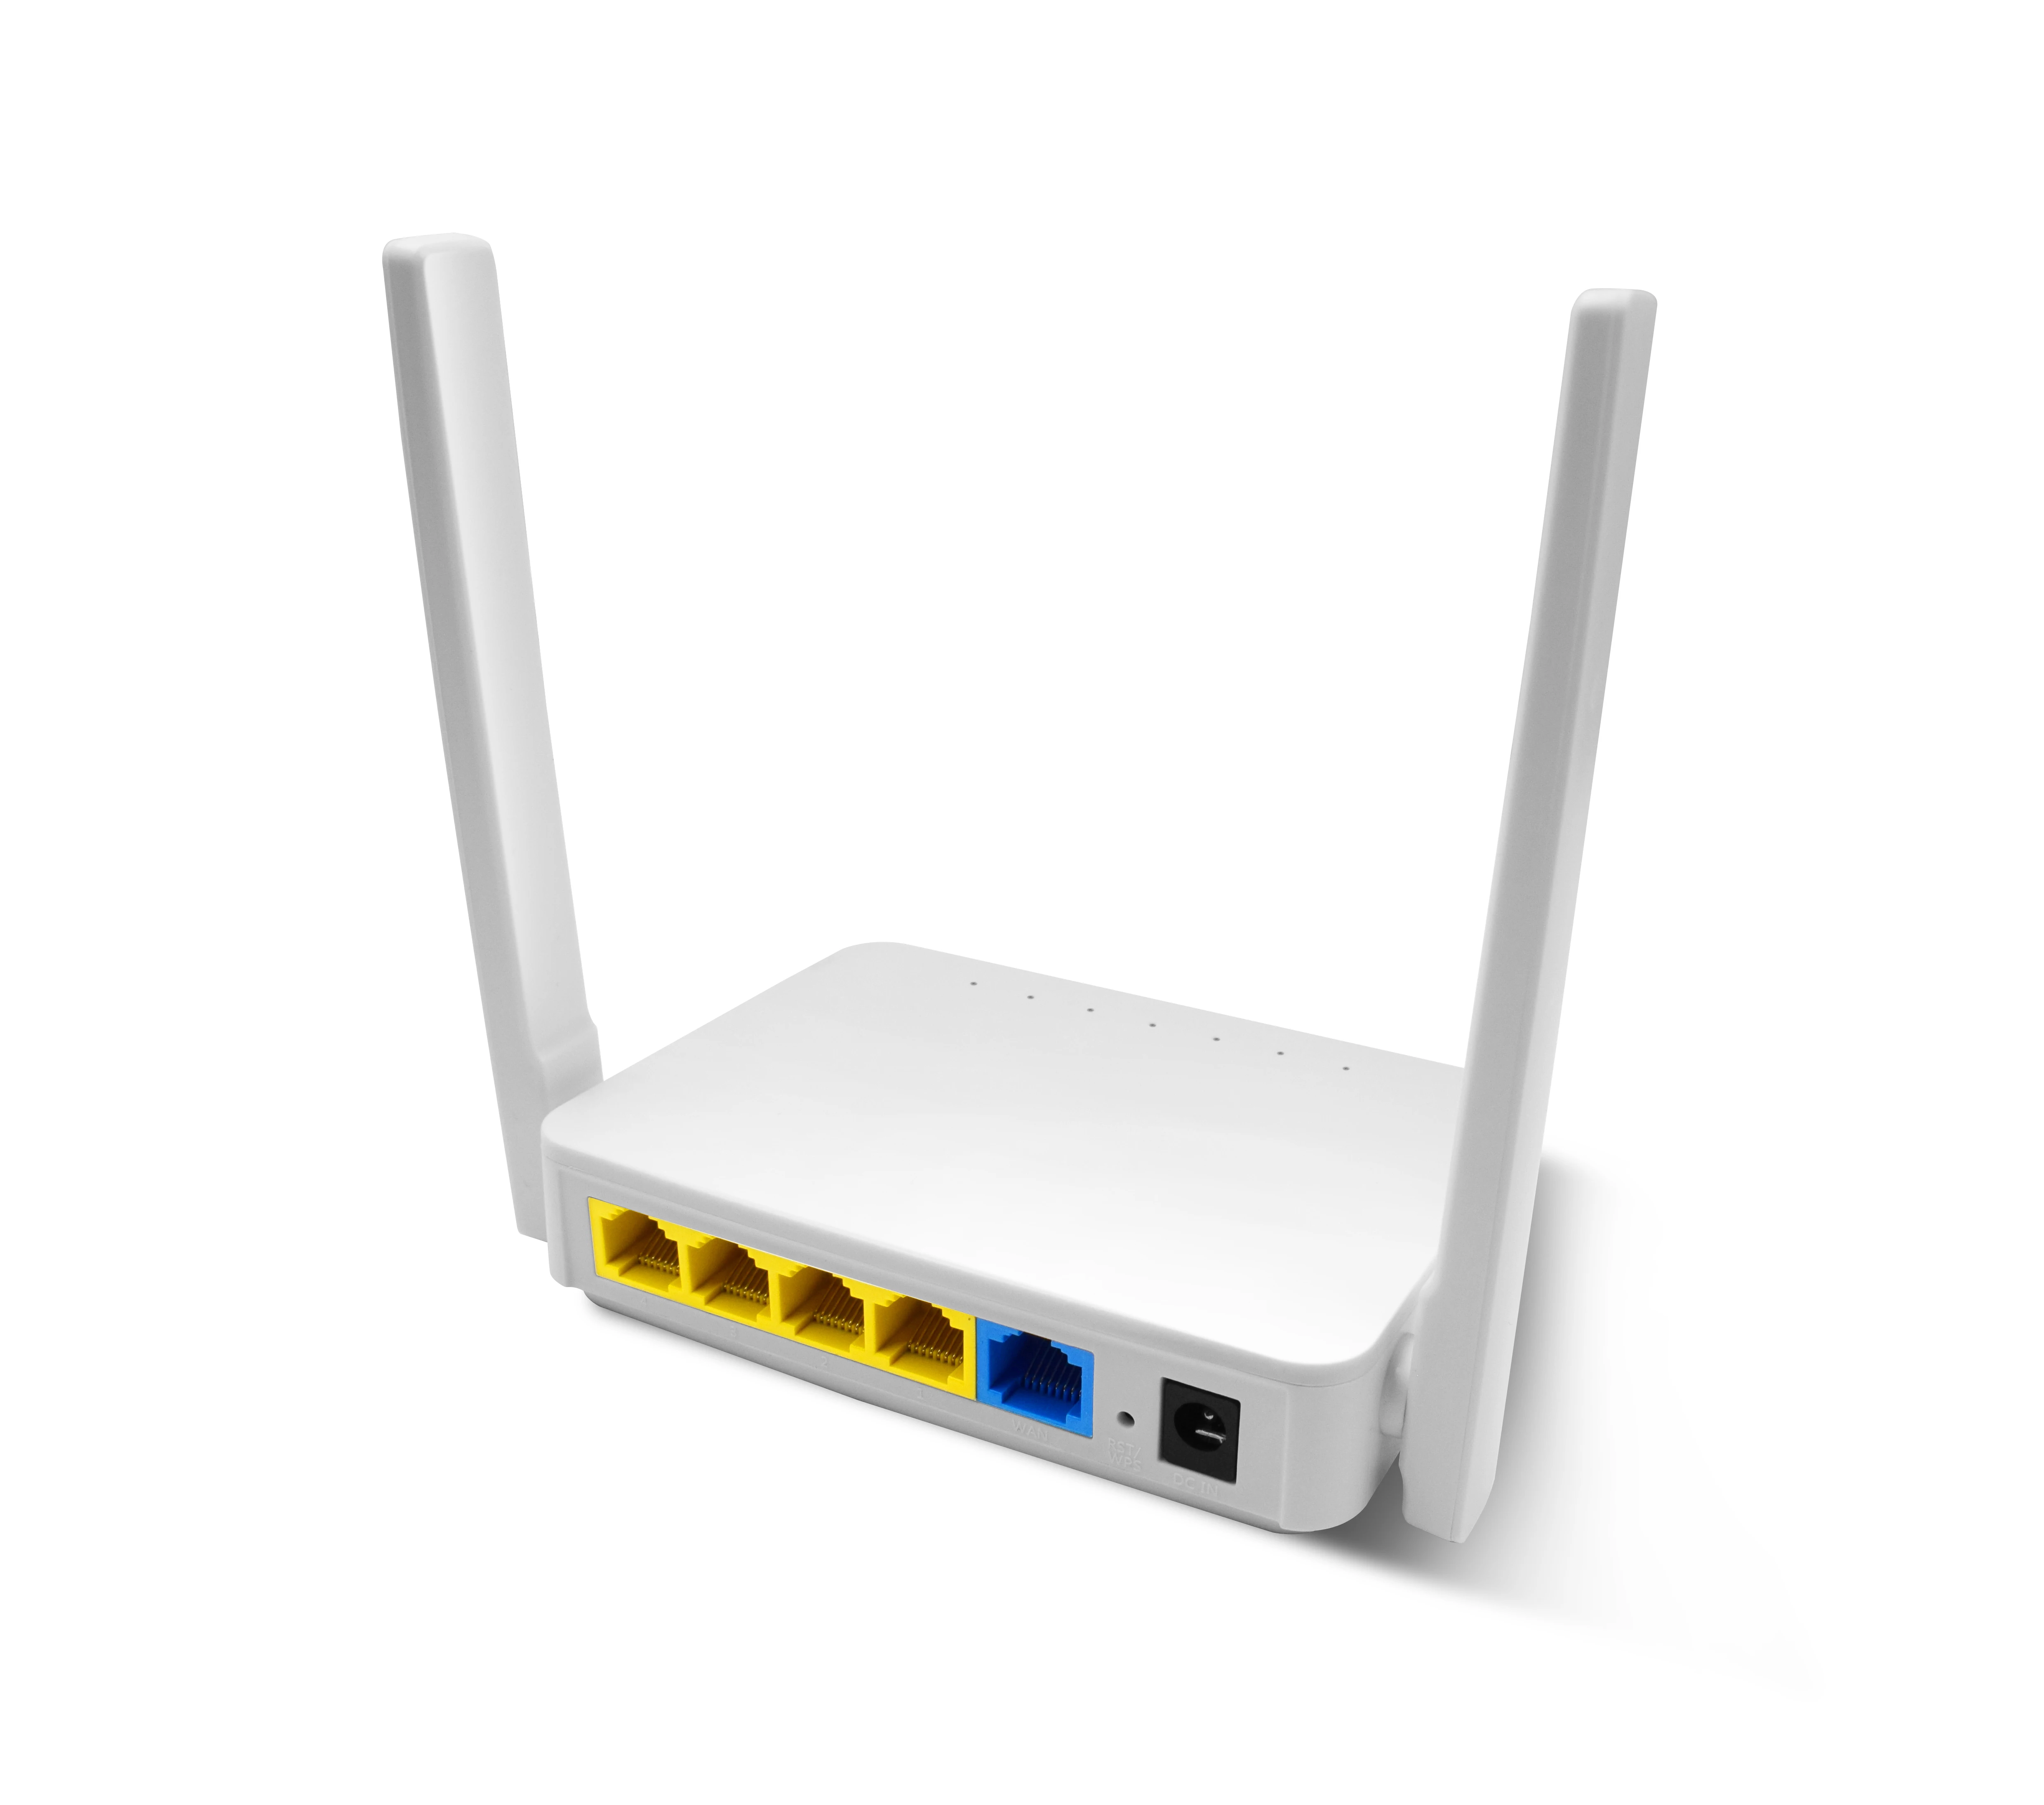 

Tp-link Wireless Router HT-WR959N Dual Antenna 300Mbps 4PORT Smart Home Wifi English Language